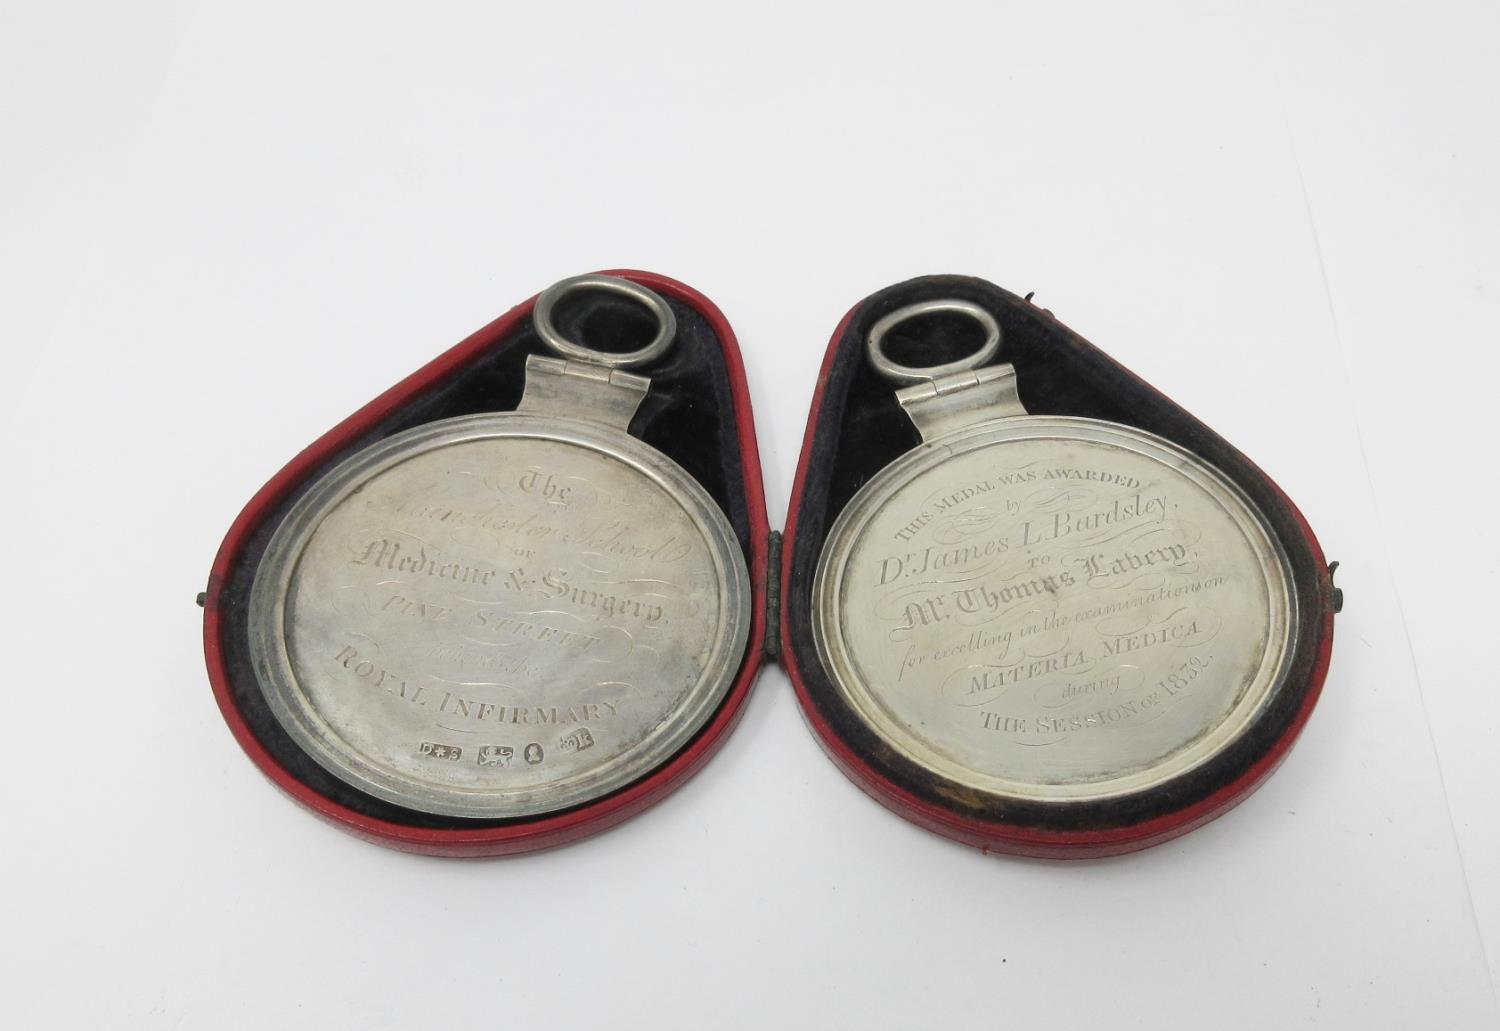 A pair of William IV silver Medical Medallions awarded to Dr J. Bardsley, 1832-3, Sheffield 1832, in